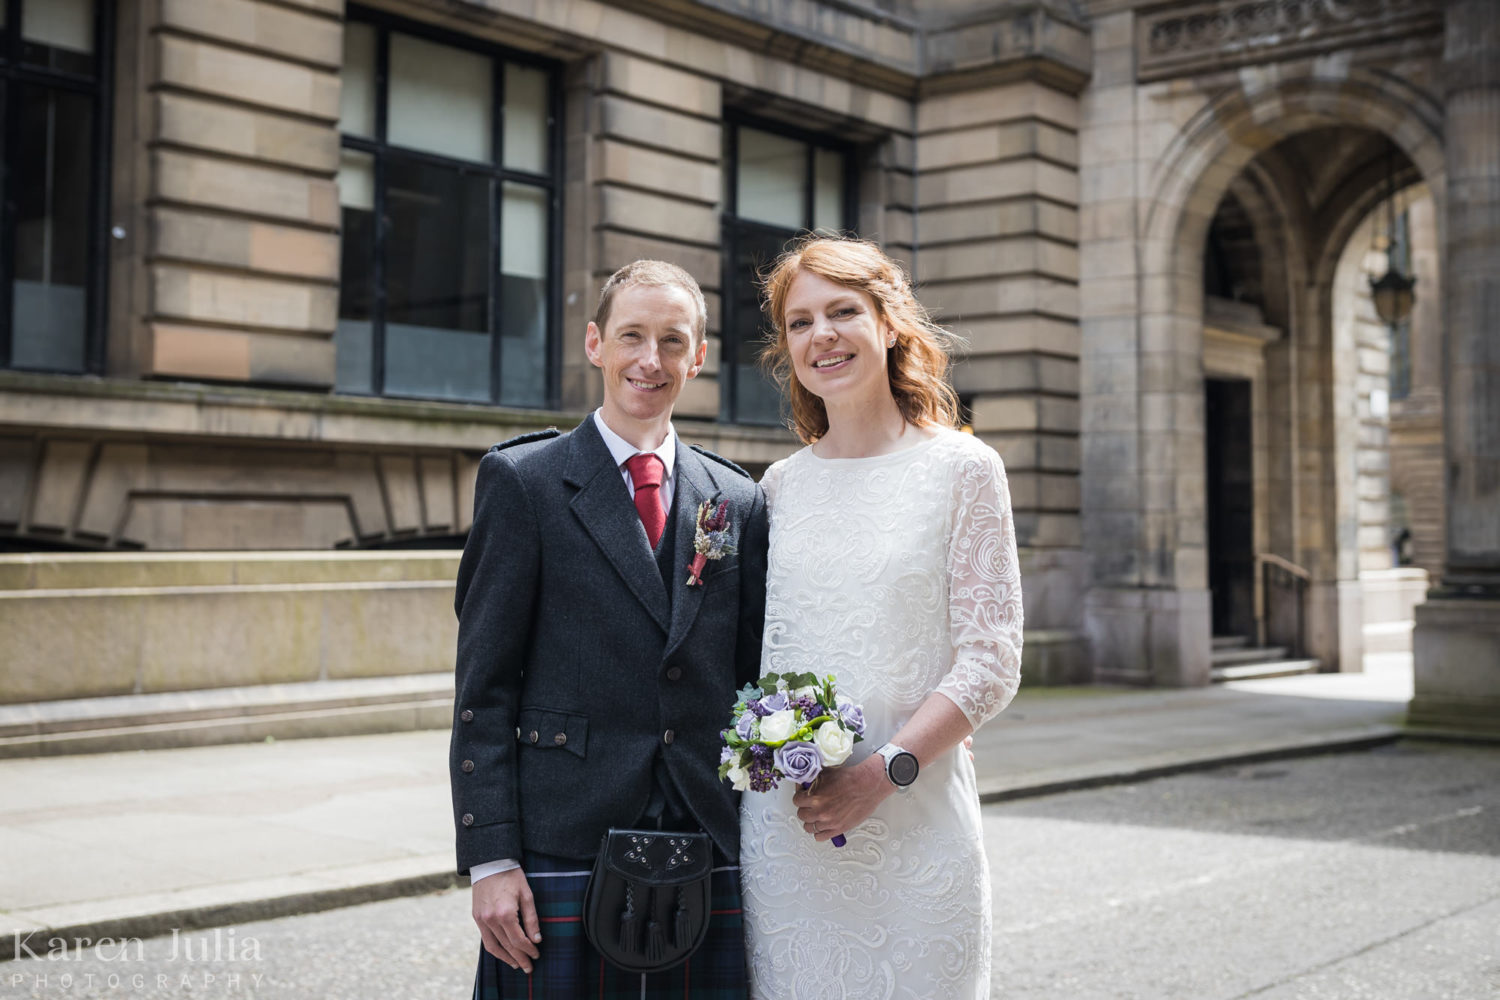 bride and groom standing together in John Street during wedding portraits